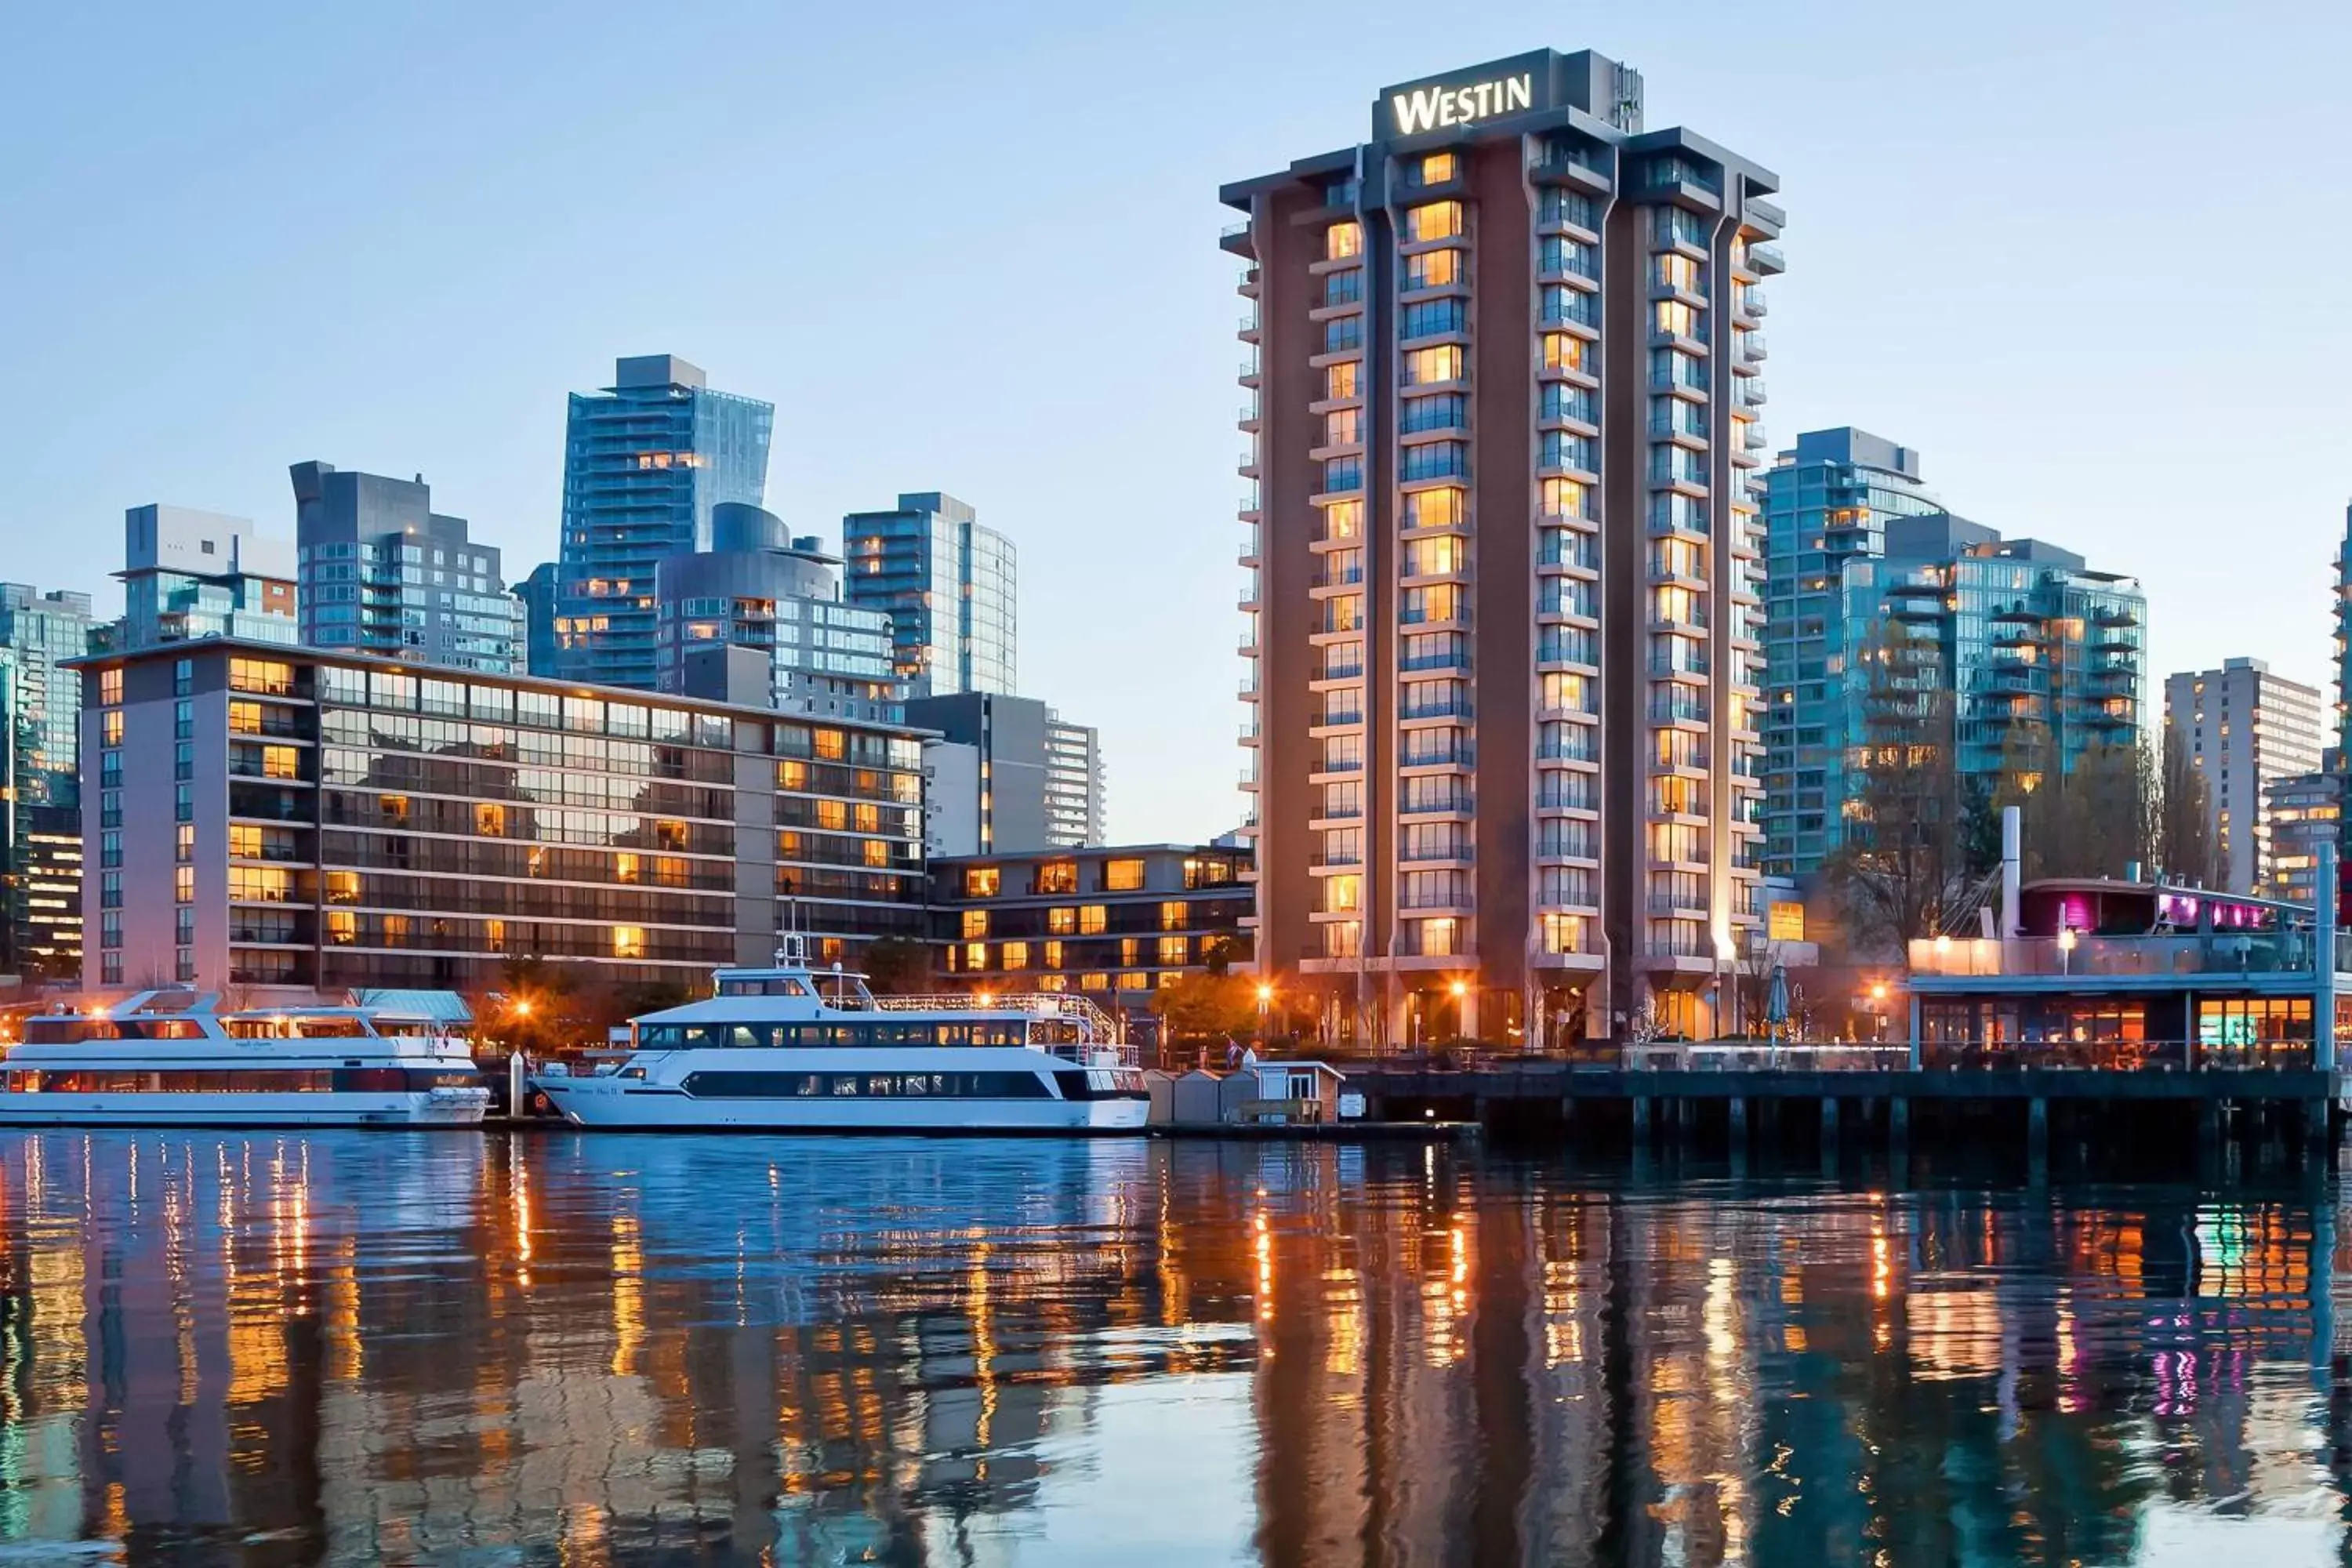 Property building in The Westin Bayshore, Vancouver